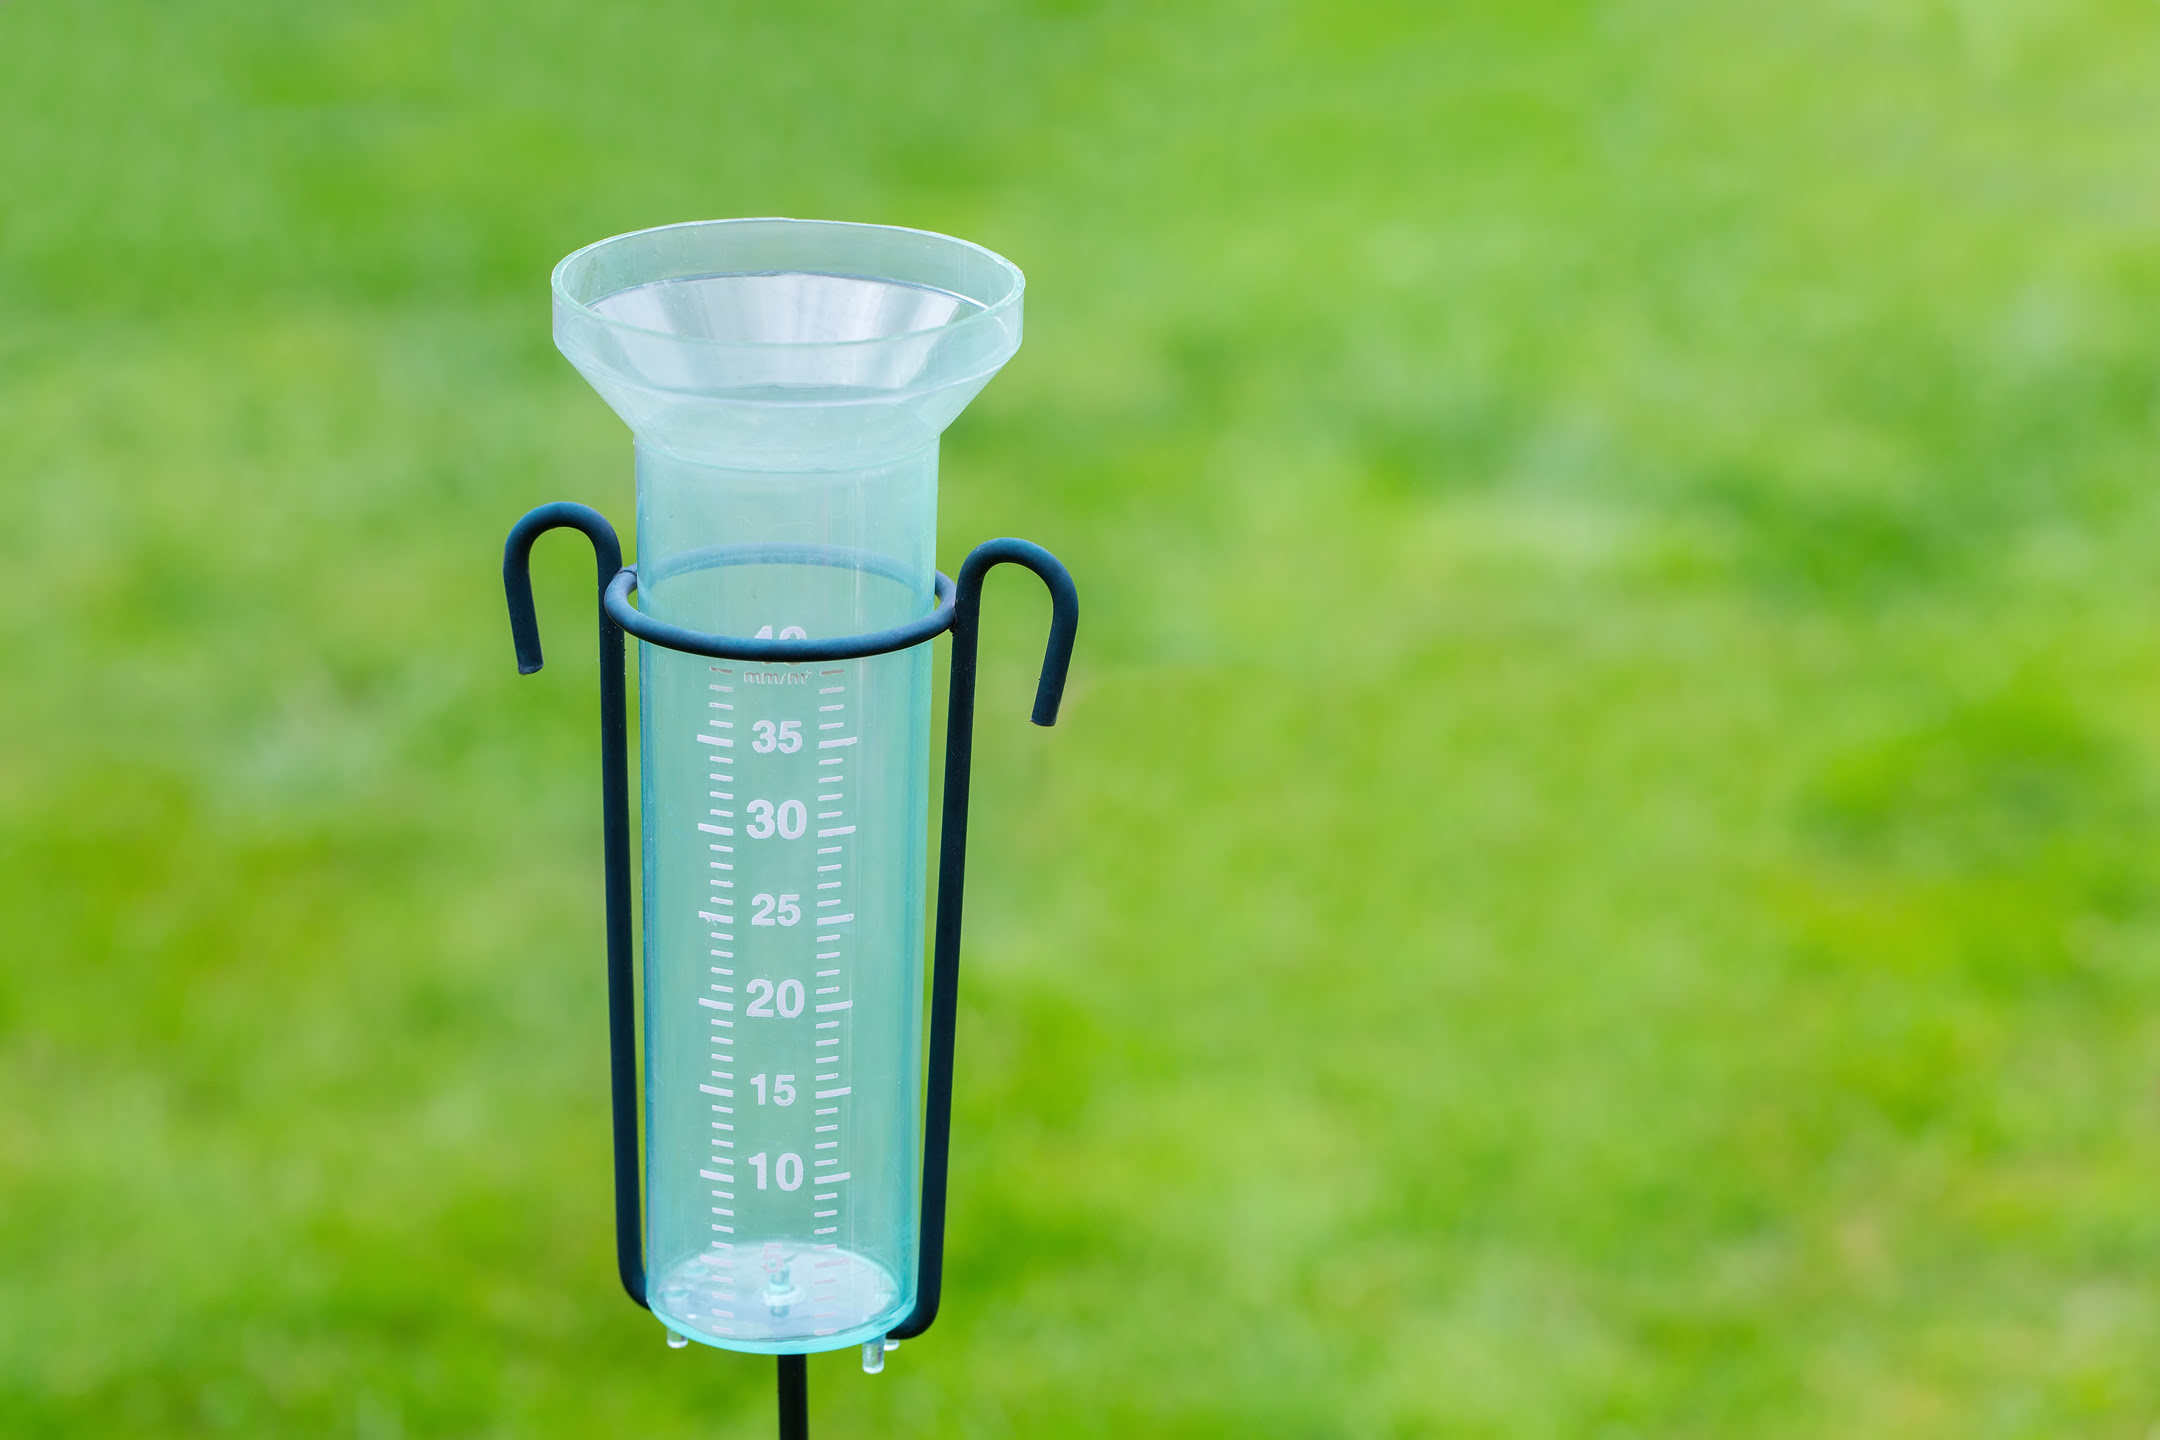 Rain Gauge Review: Accurate and Reliable Measurement Tool